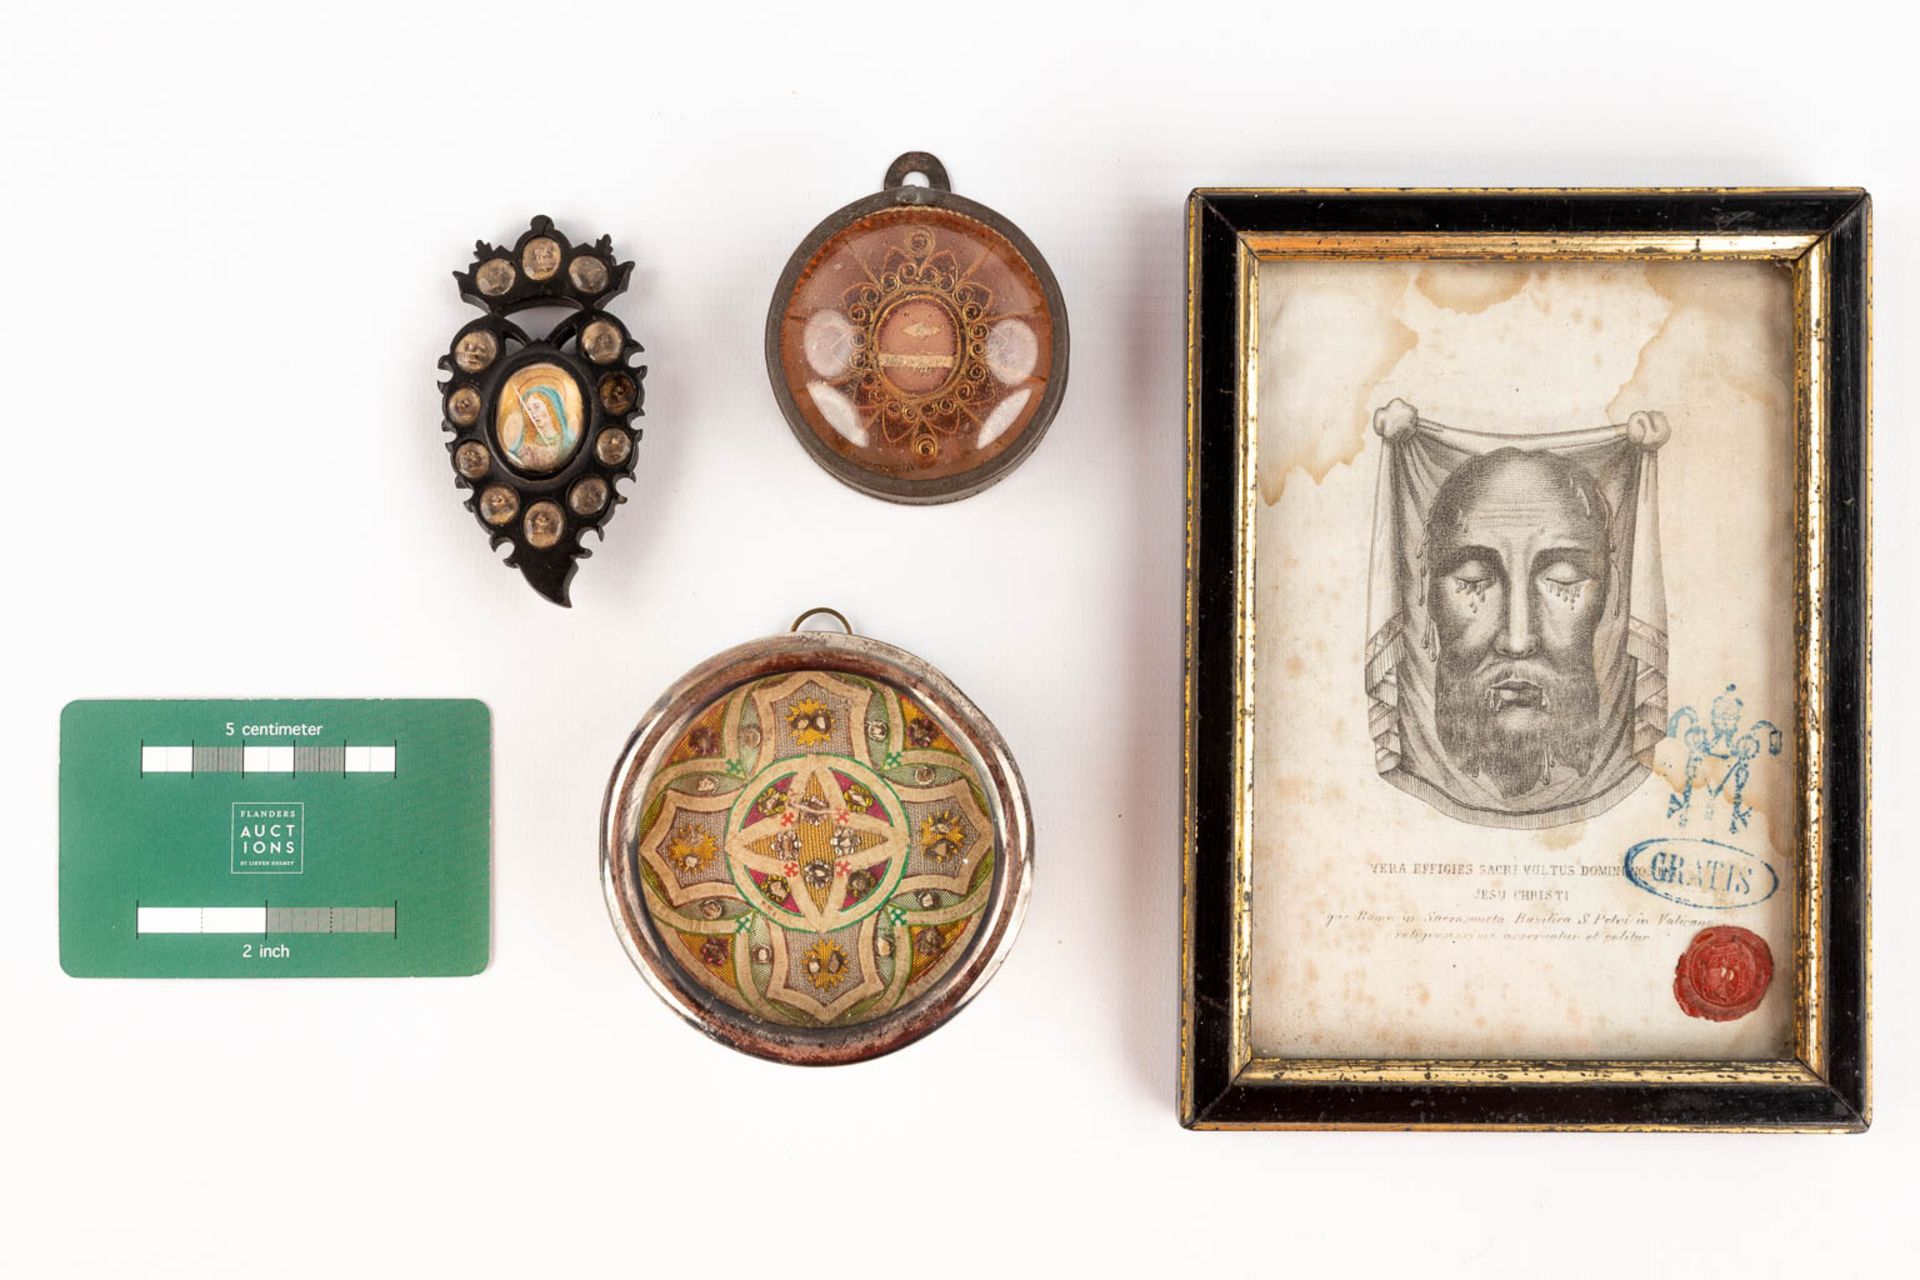 A small collection of relics and reliquary items, The Veil of Veronica, a relic in the shape of a sa - Image 2 of 11